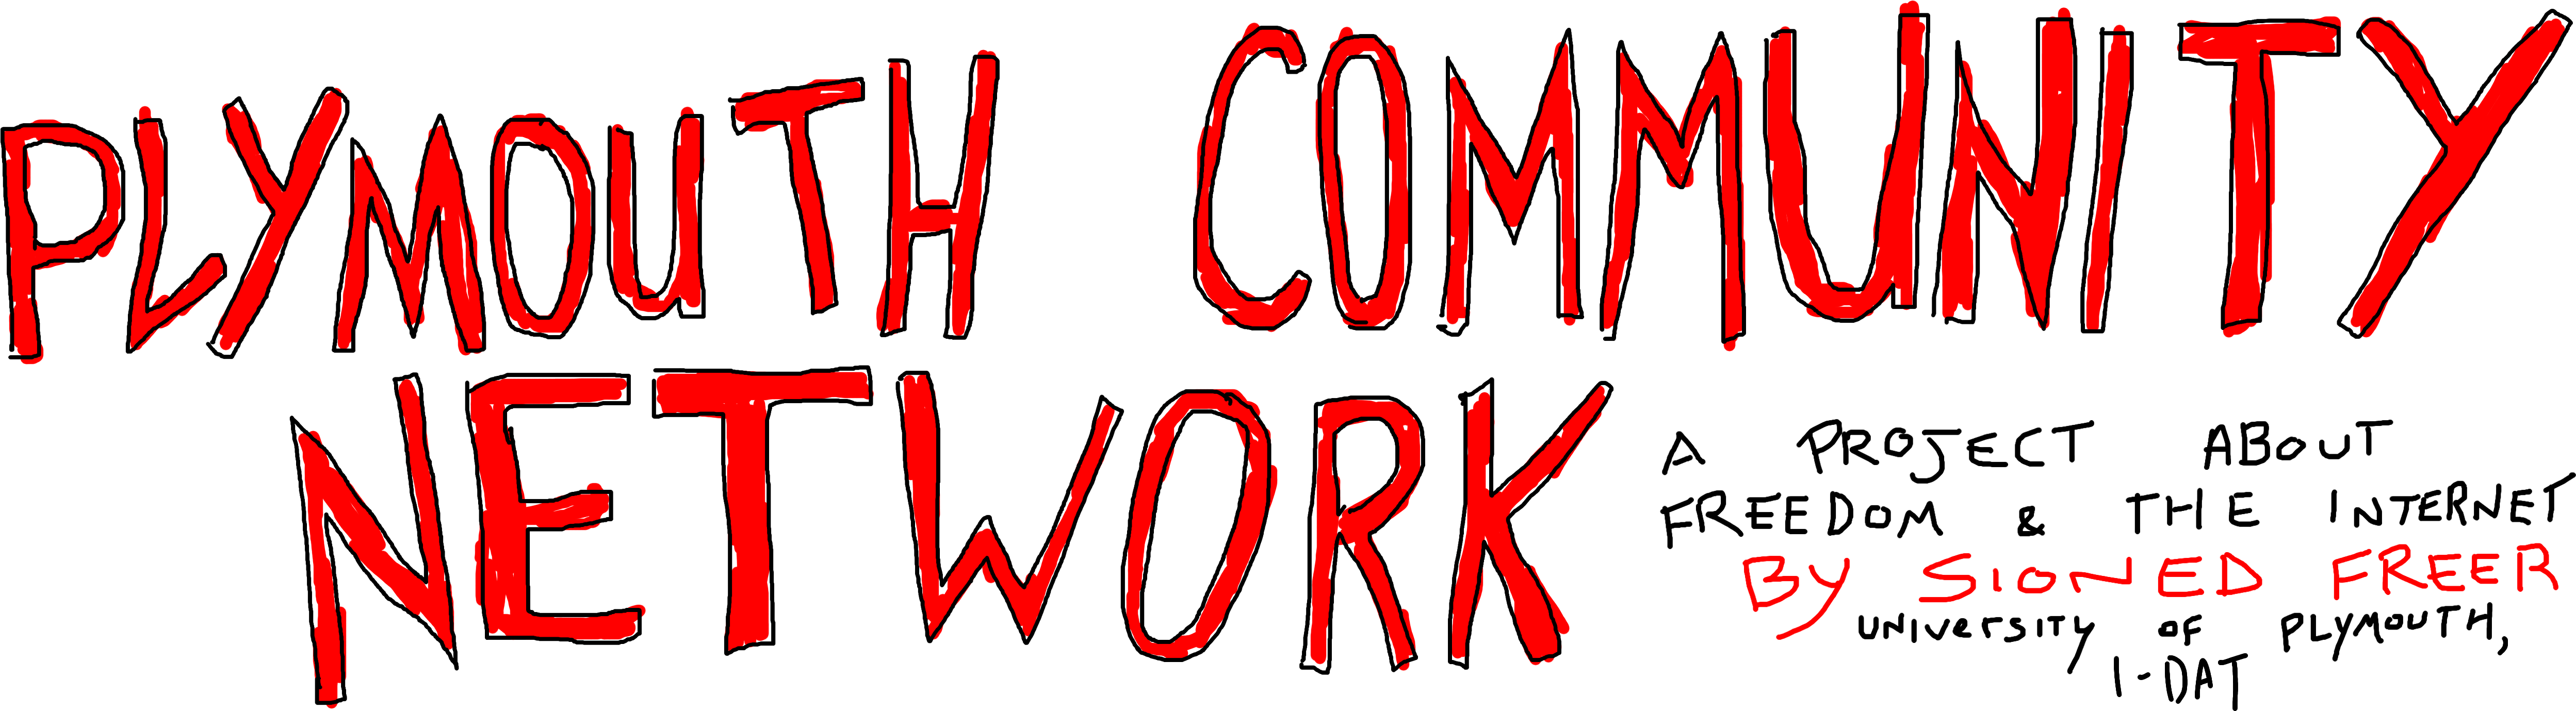 Plymouth Community Network